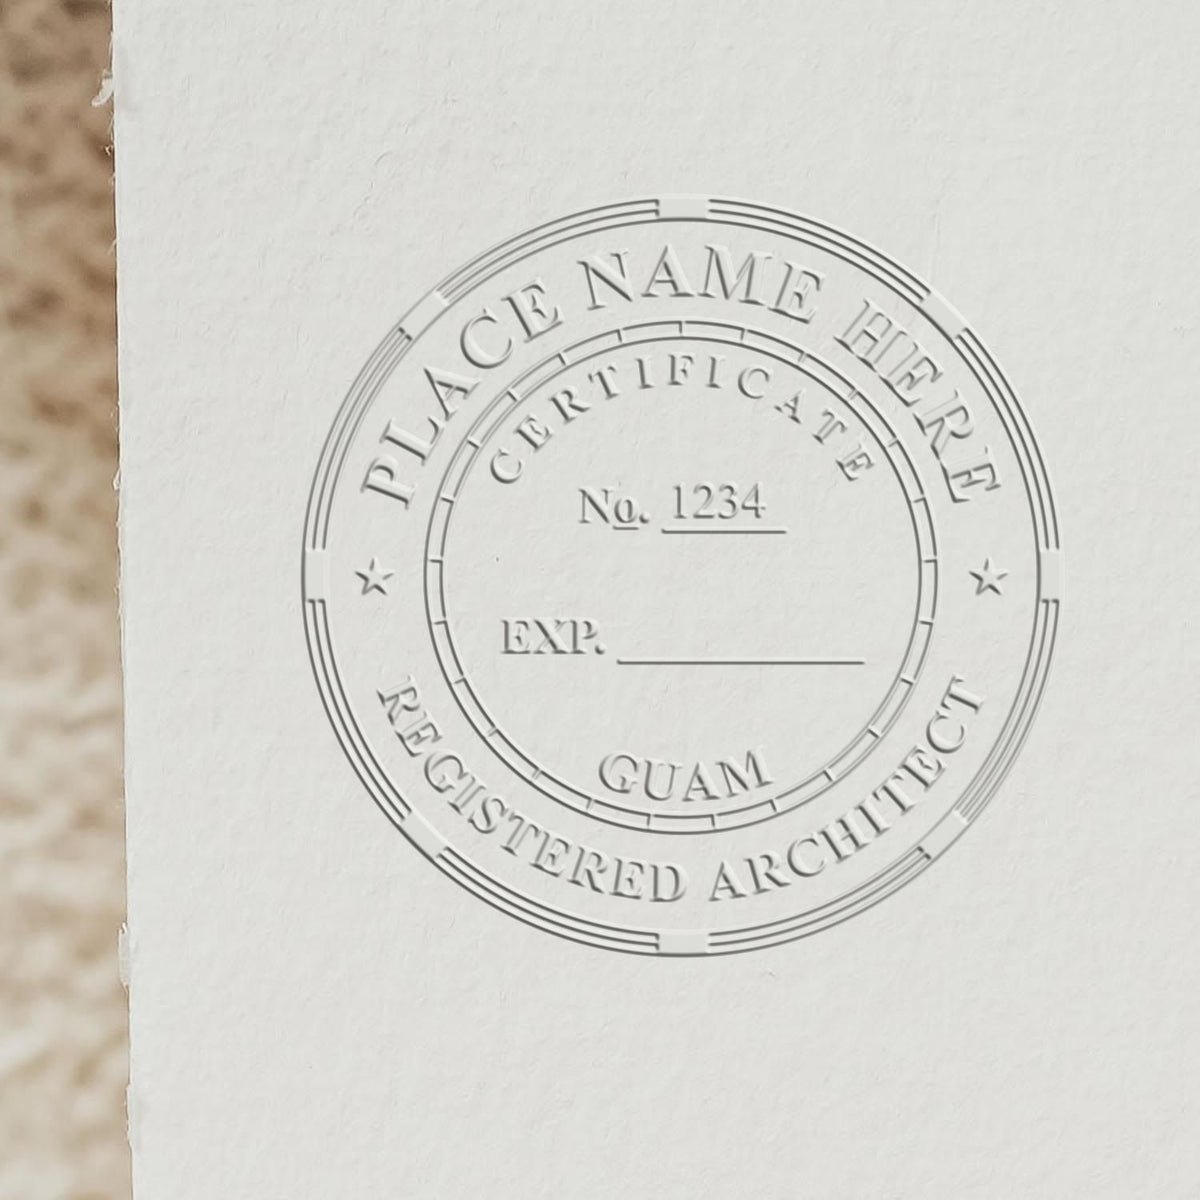 The State of Guam Long Reach Architectural Embossing Seal stamp impression comes to life with a crisp, detailed photo on paper - showcasing true professional quality.